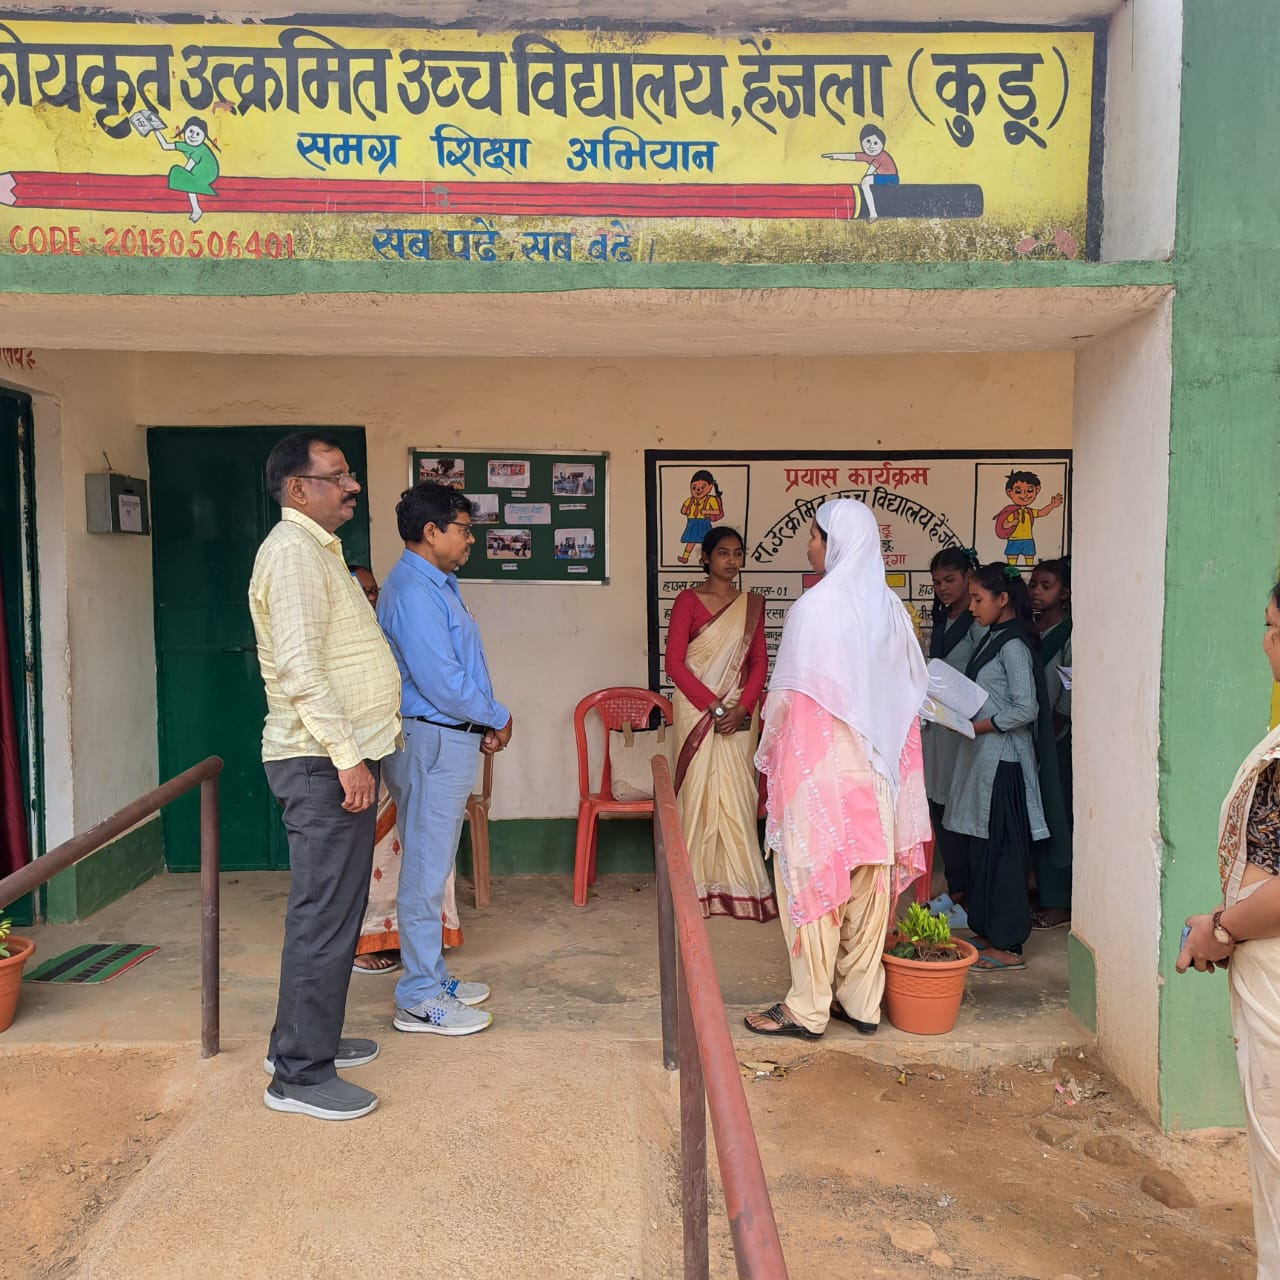 Jharkhand-s-campaign-to-motivate-voters-for-ethical-voting-Chief-Electoral-Officer-inspected-the-polling-station-of-Gumla